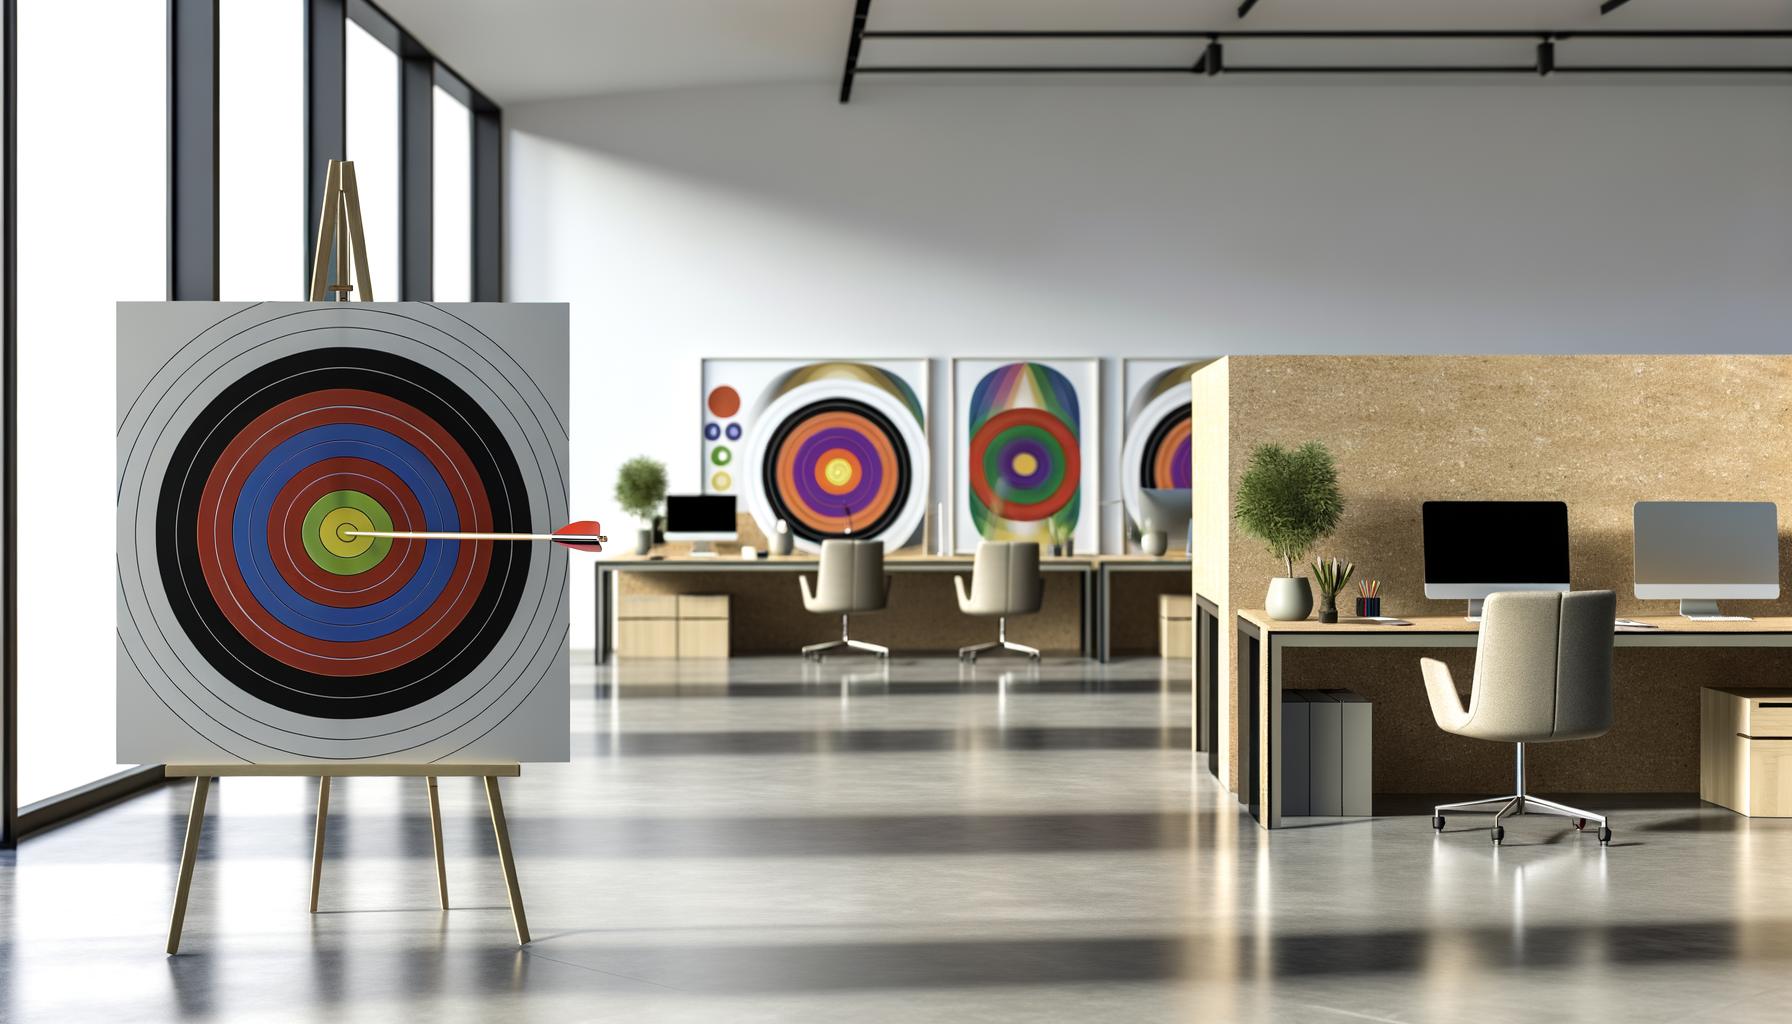 an archery target in a modern office space